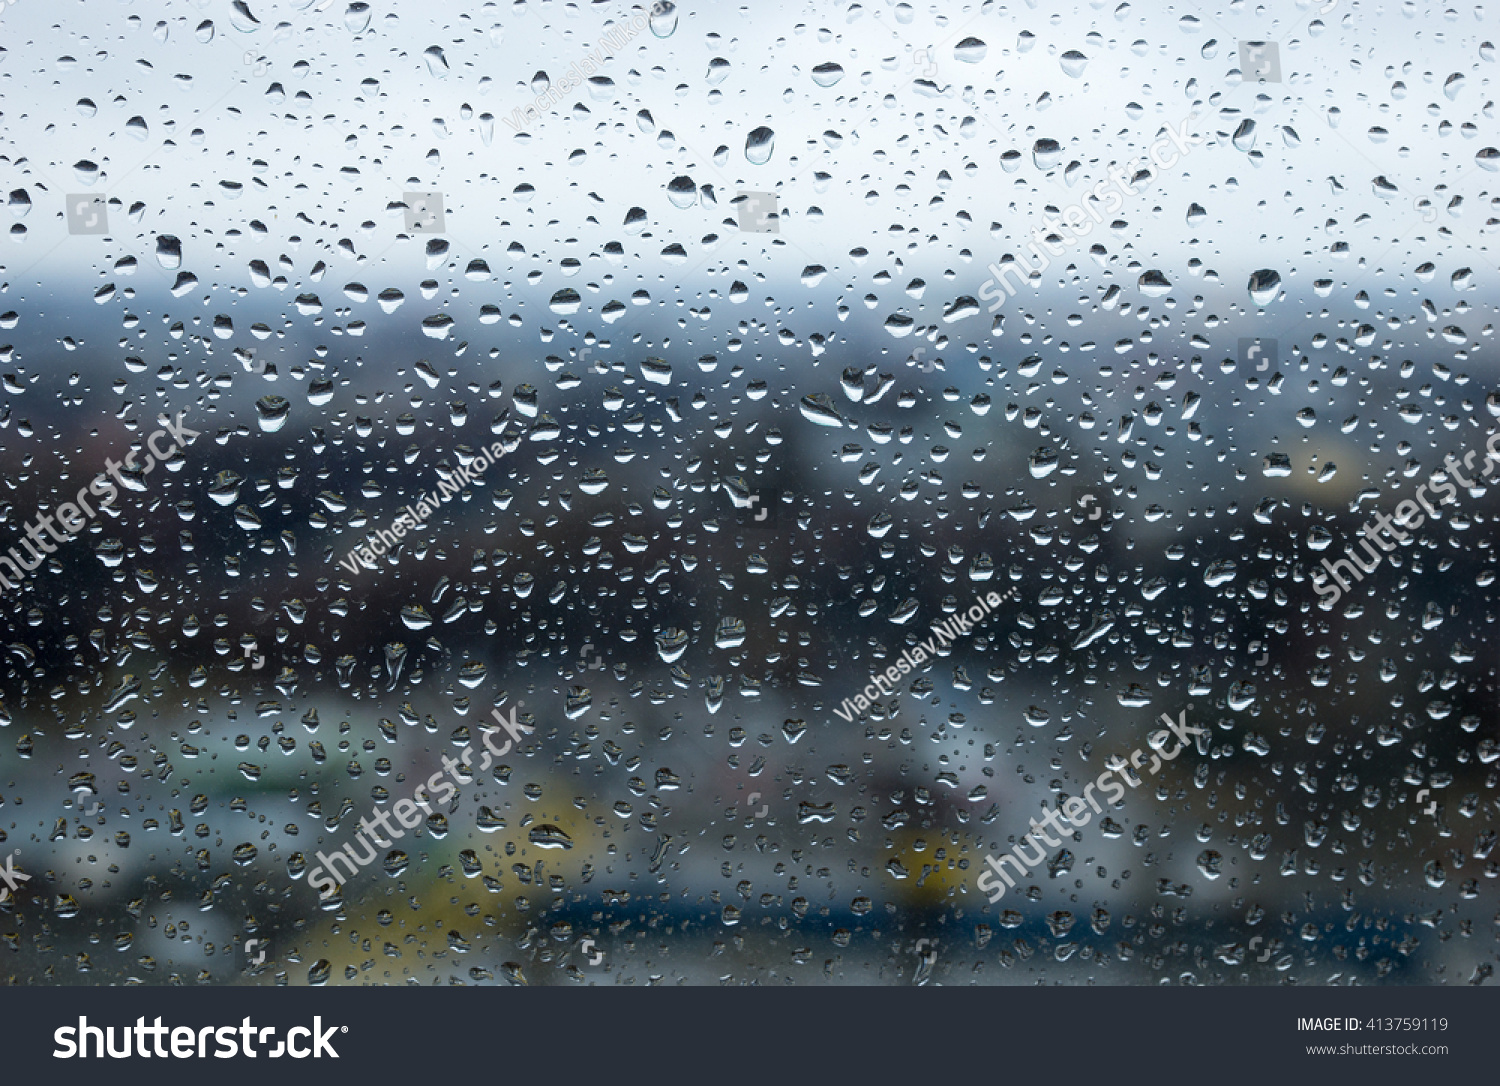 Raindrops or water droplets beaded on the surface of a glass window pane with blurred background #413759119